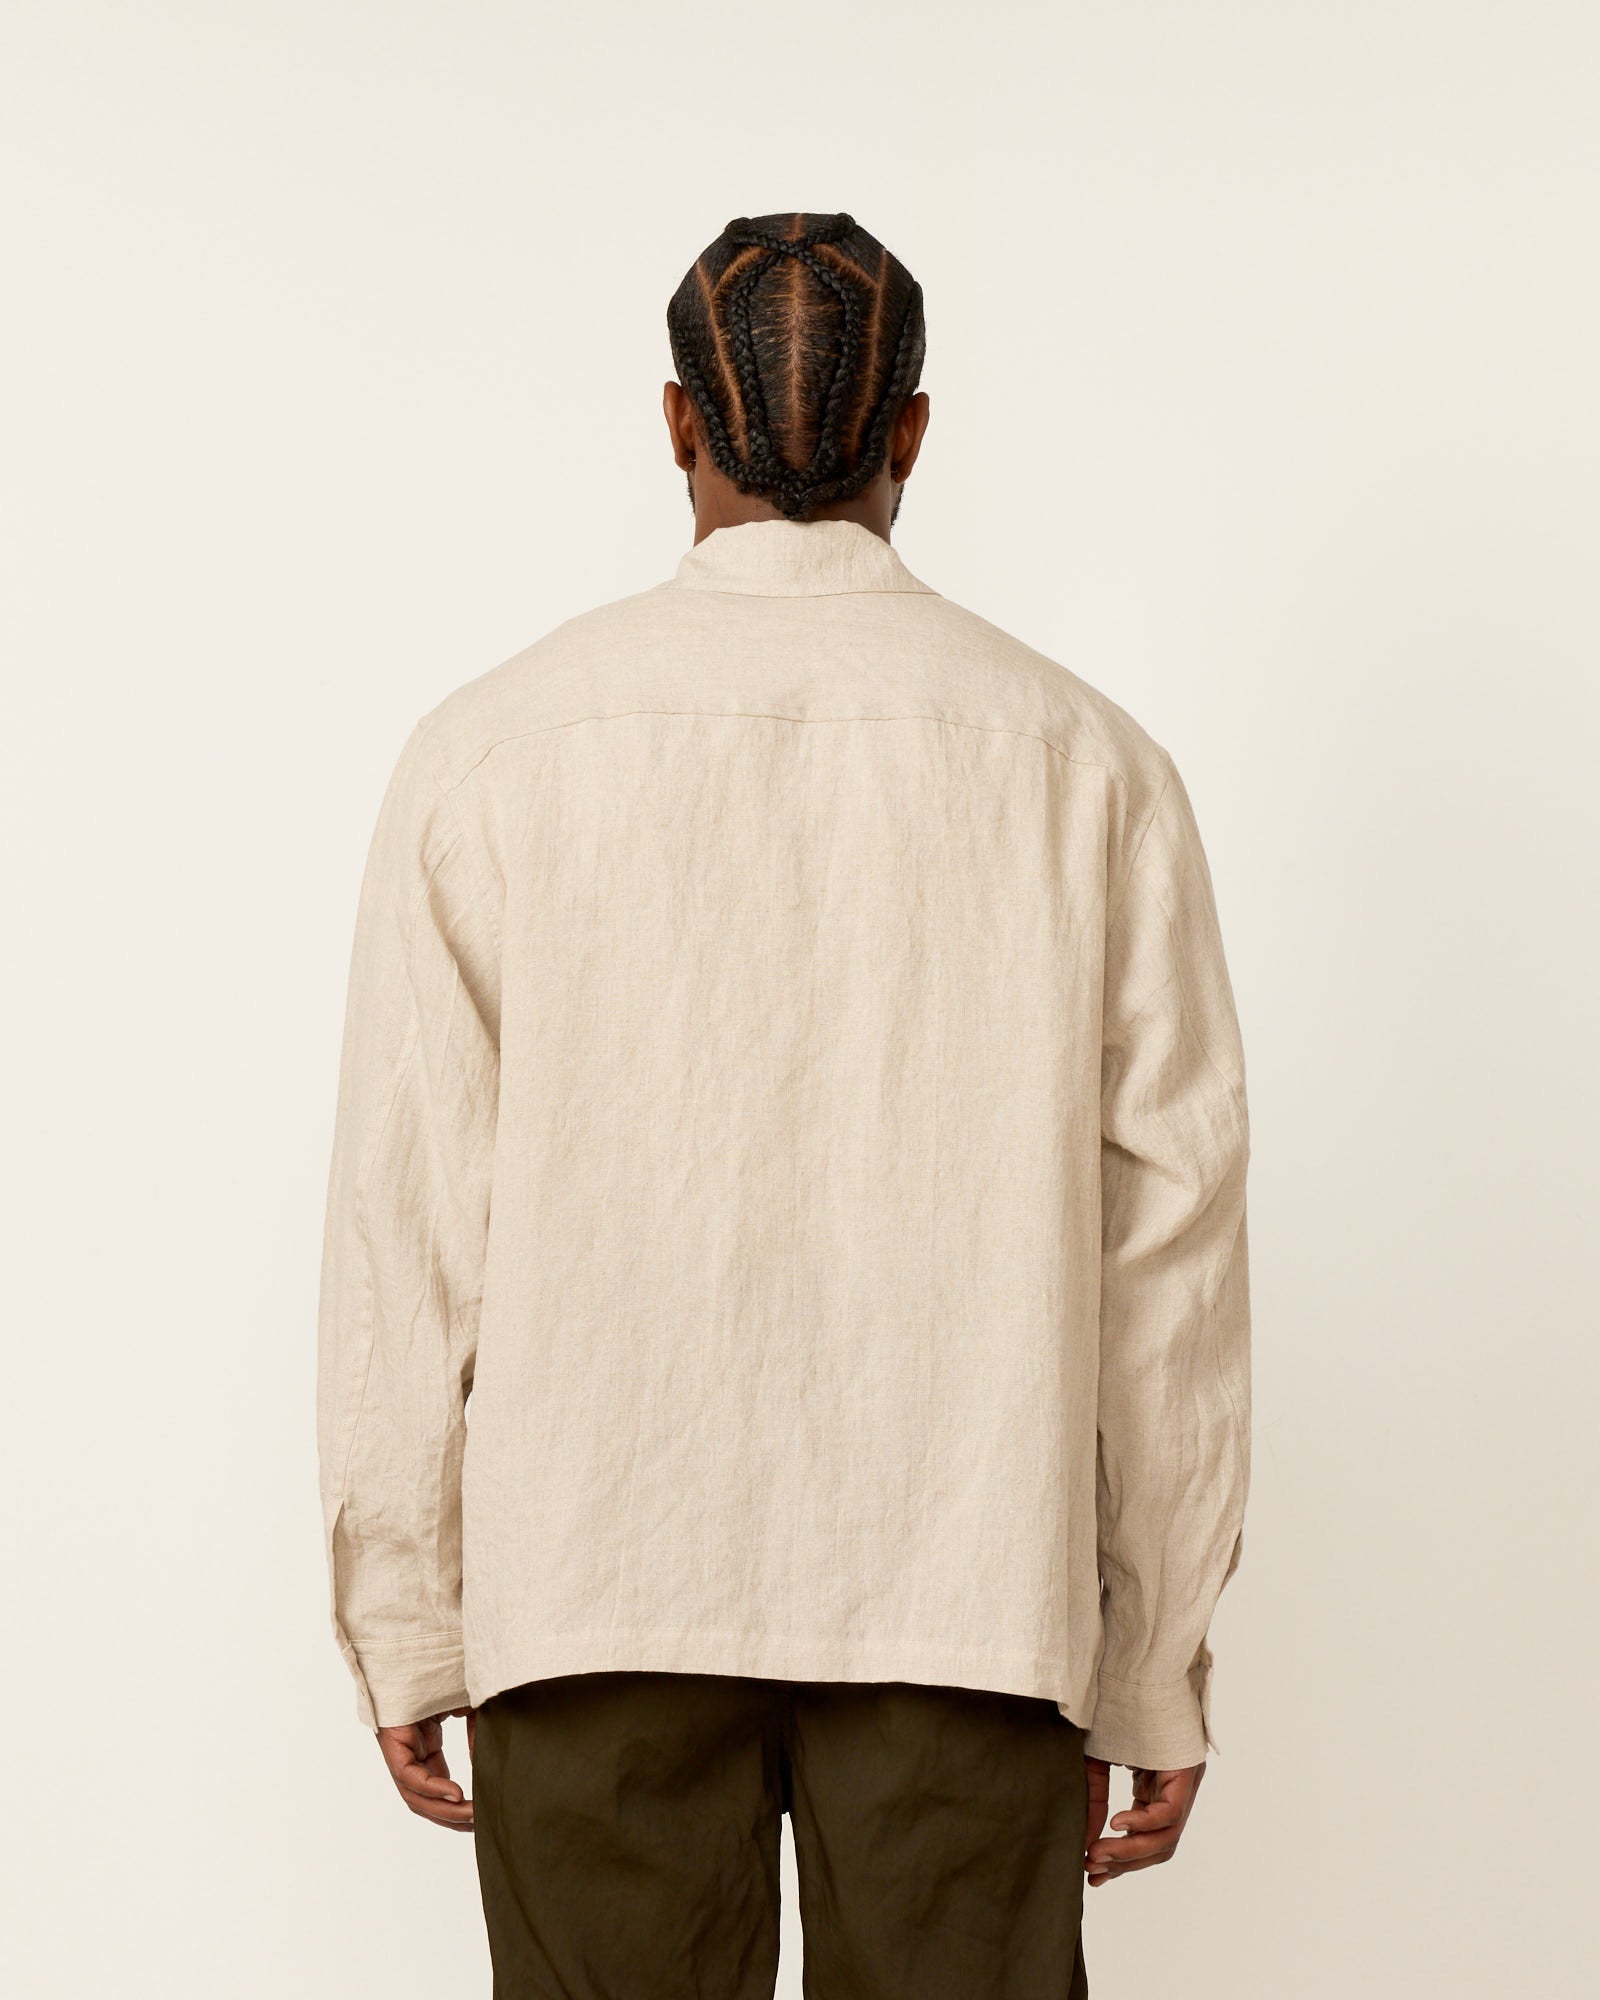 Paper Mixed Shirt Jacket in Oatmeal